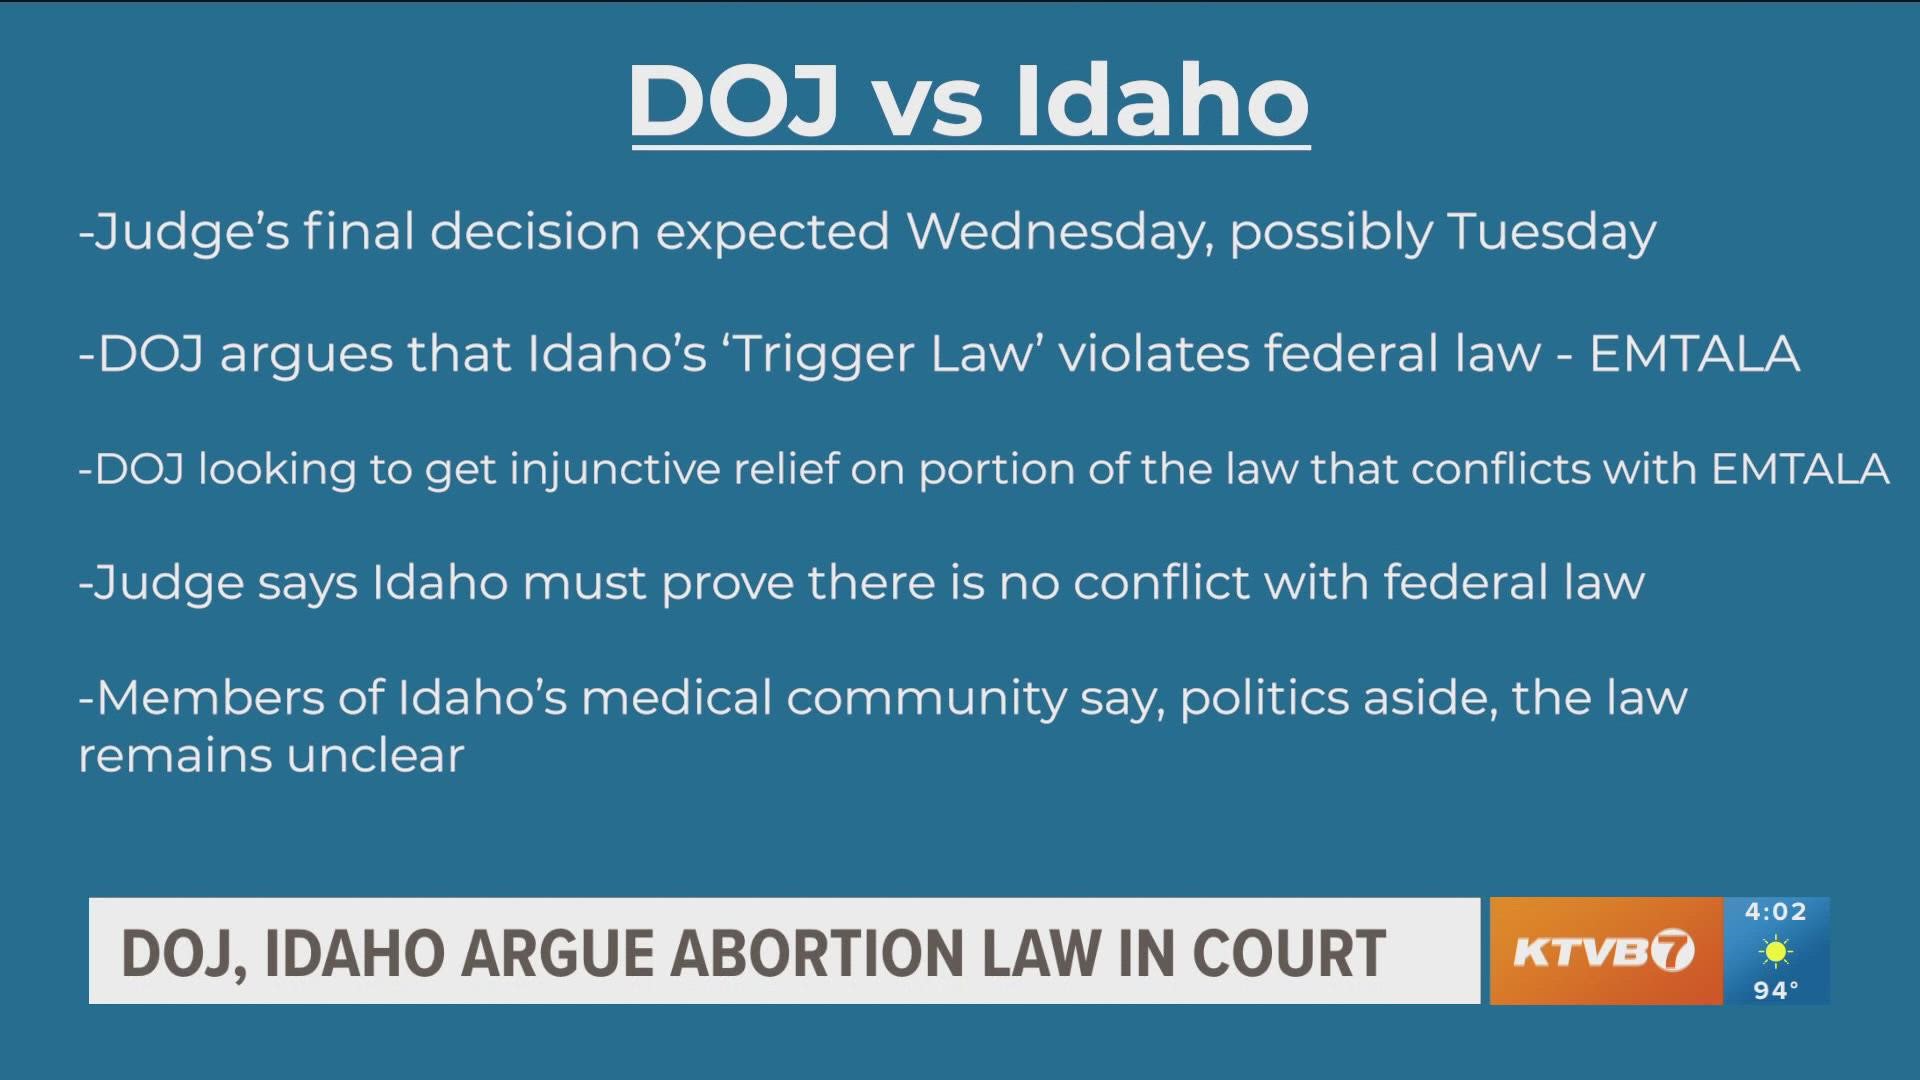 United States District Judge B. Lynn Winmill said that he has serious concerns Idaho's near-total abortion law conflicts with federal law at a hearing on Monday.